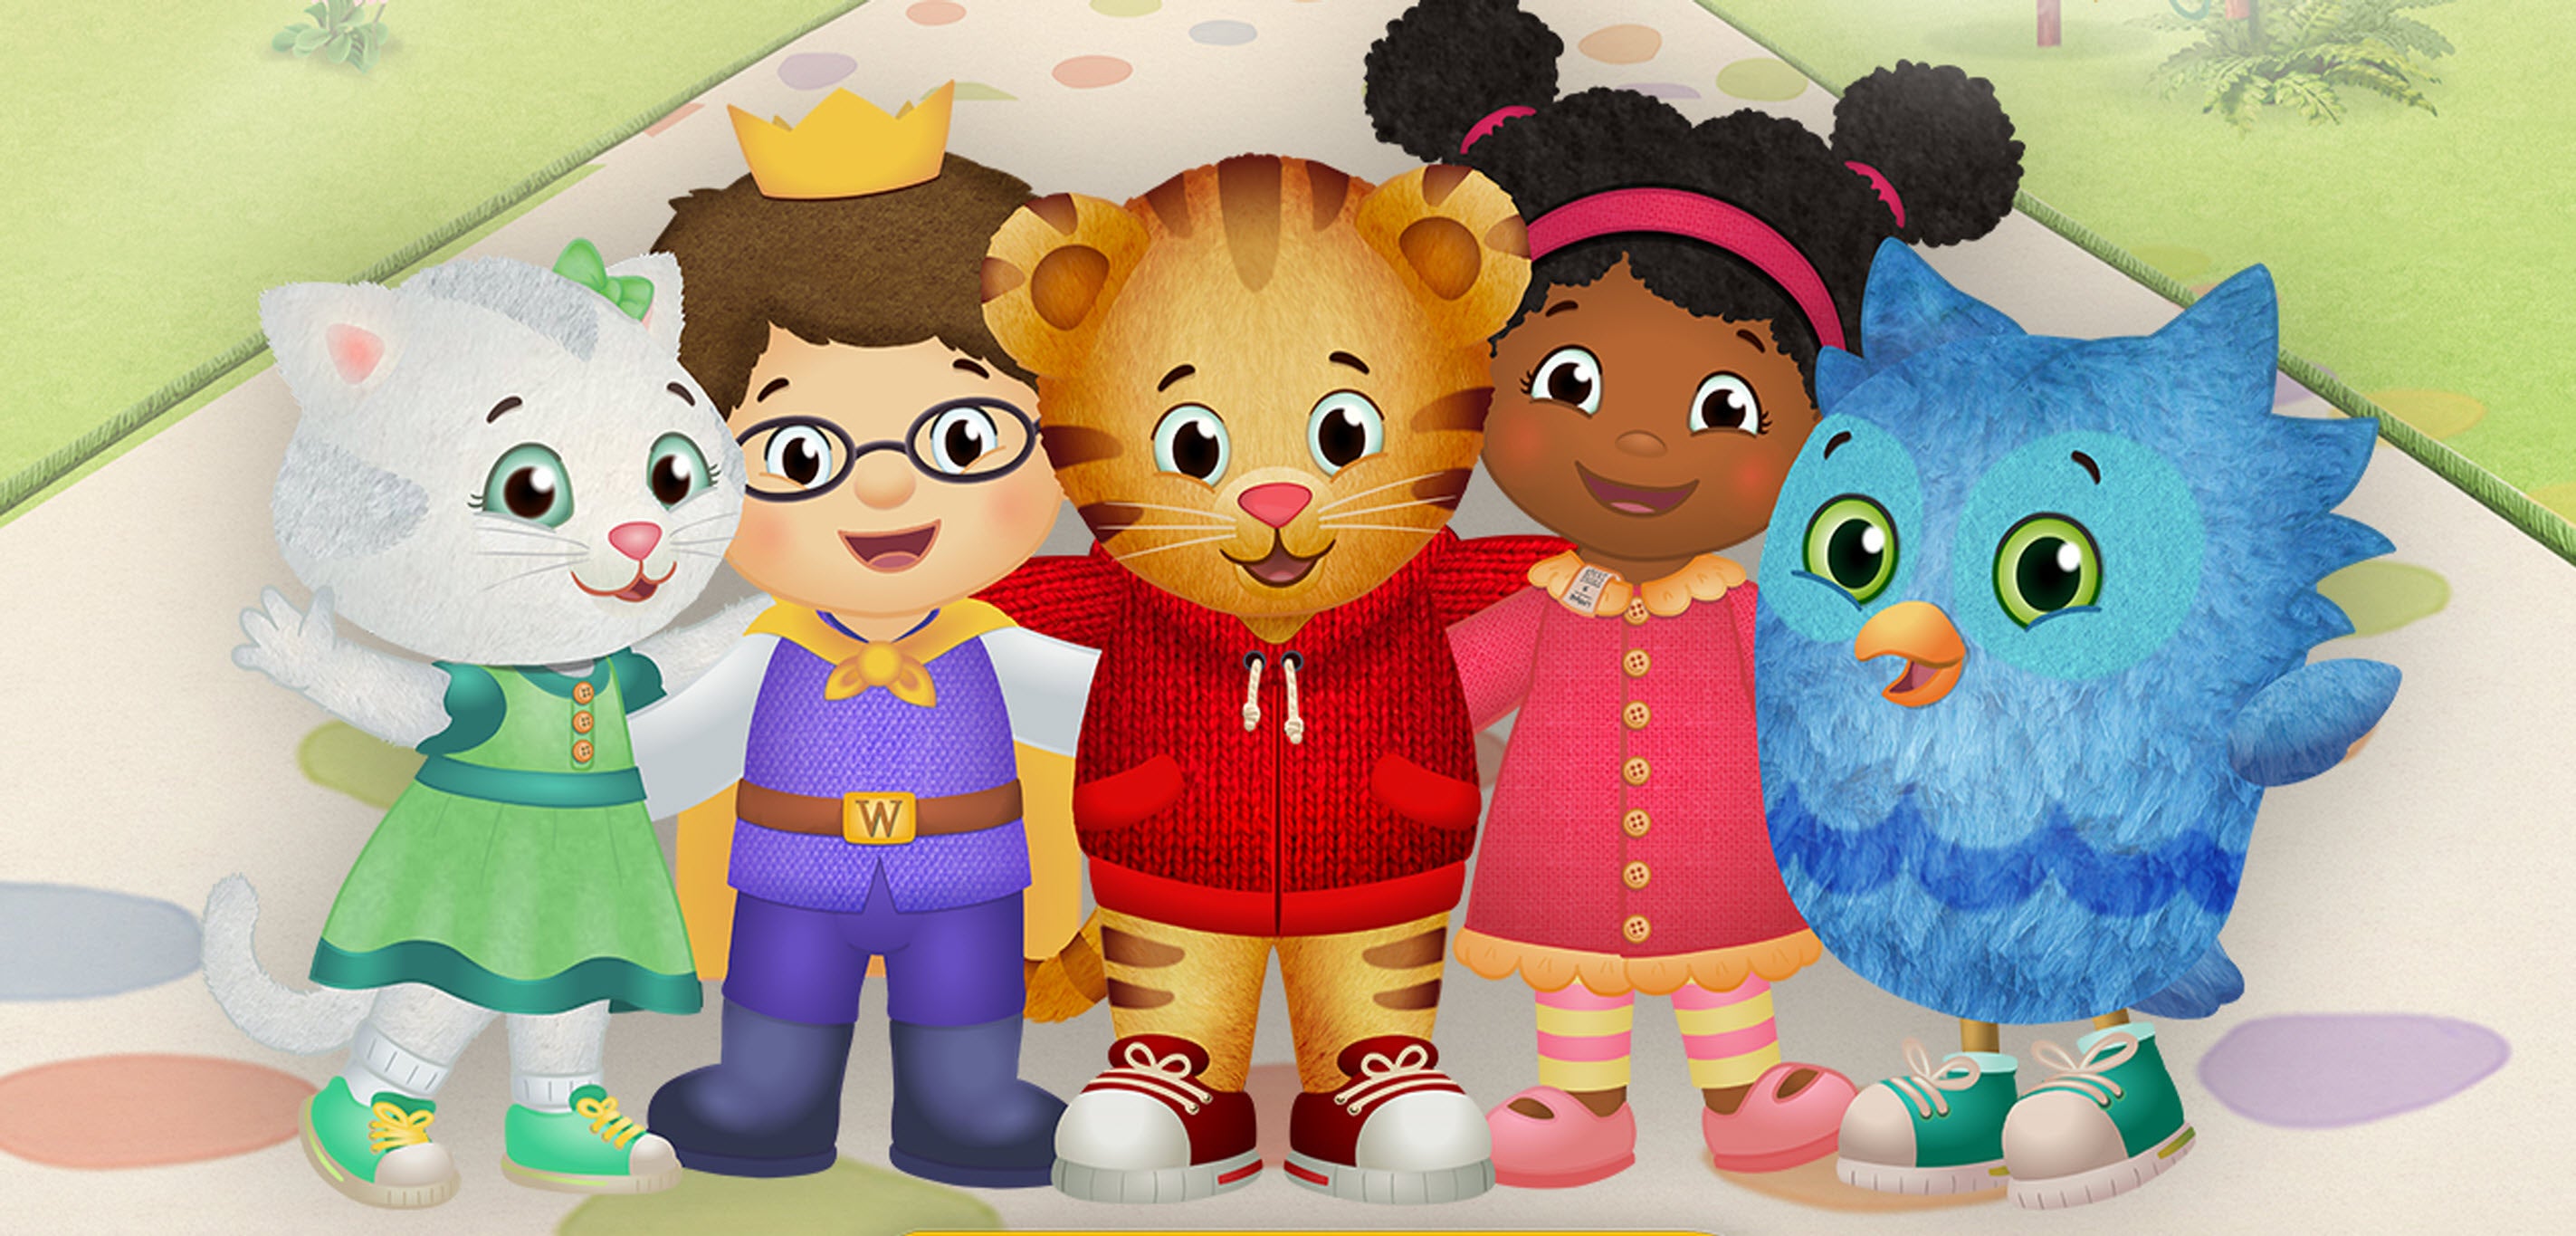 Daniel Tiger's Neighborhood Live! - King For A Day in Seattle promo photo for Promoter presale offer code